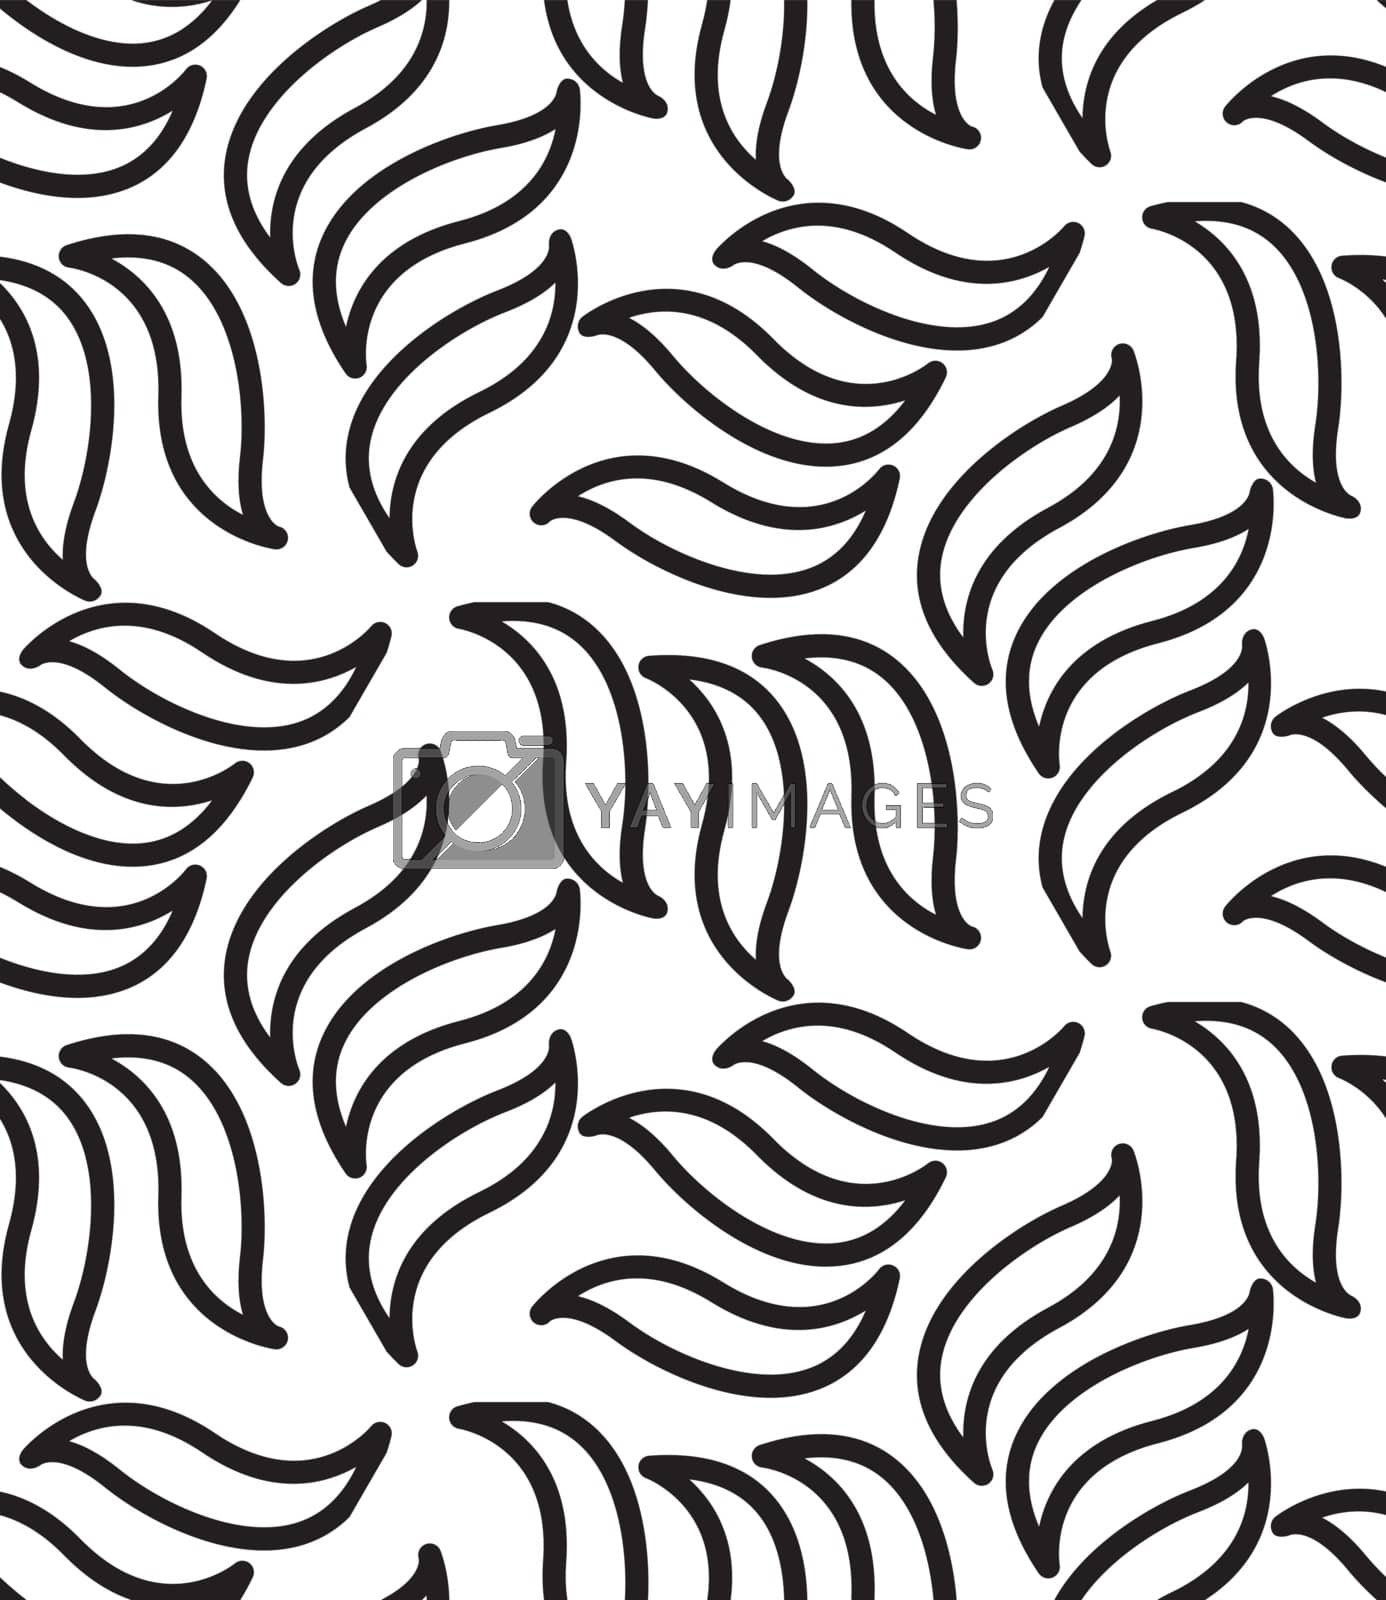 Royalty free image of Vector geometric seamless pattern. Modern floral, leaves texture by Softulka